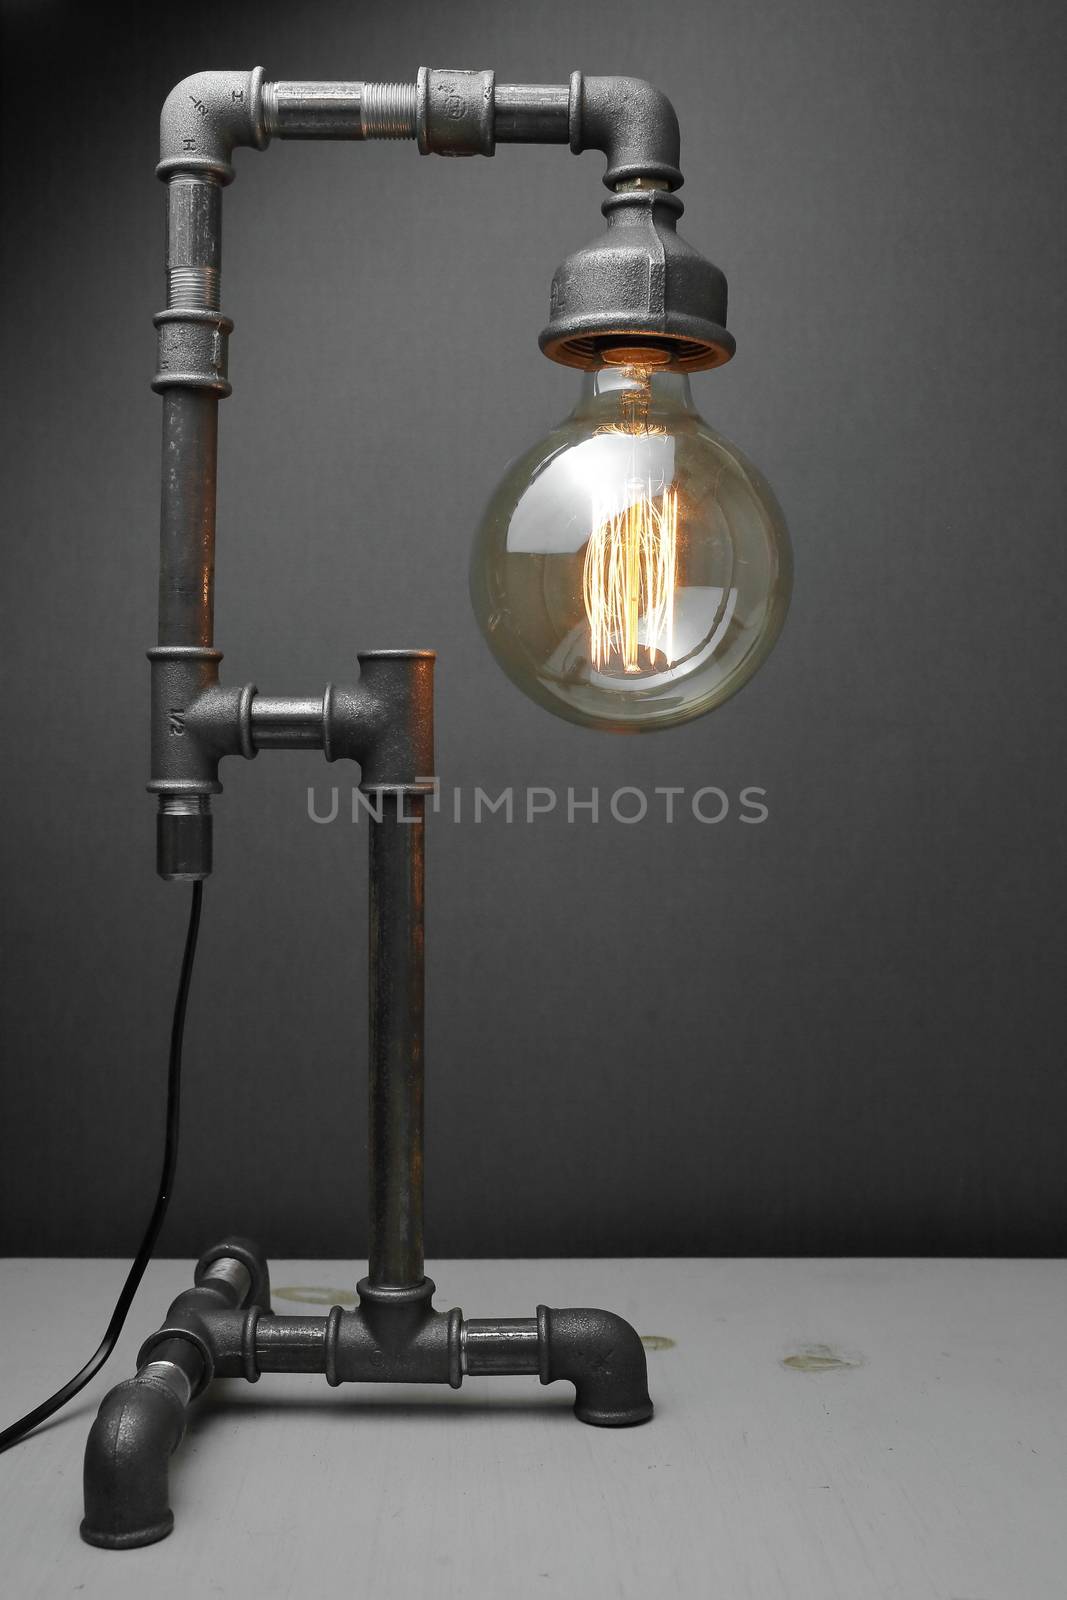 Retro lamp made of metal water pipes with an Edison lamp on a gray background. The concept is a good idea. High quality photo